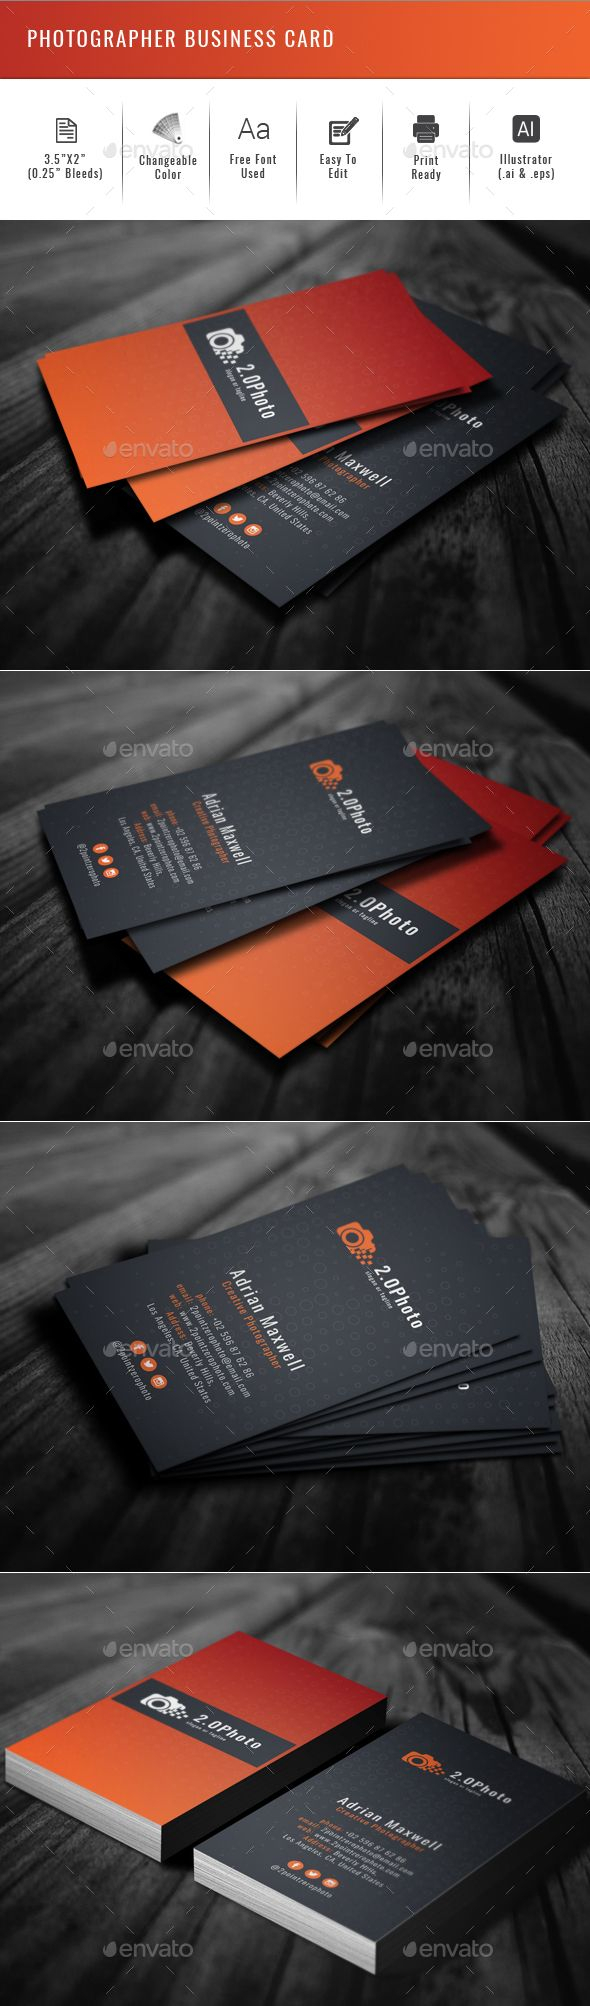 Double Sided Business Card Template Illustrator ] – Freebie Pertaining To Double Sided Business Card Template Illustrator